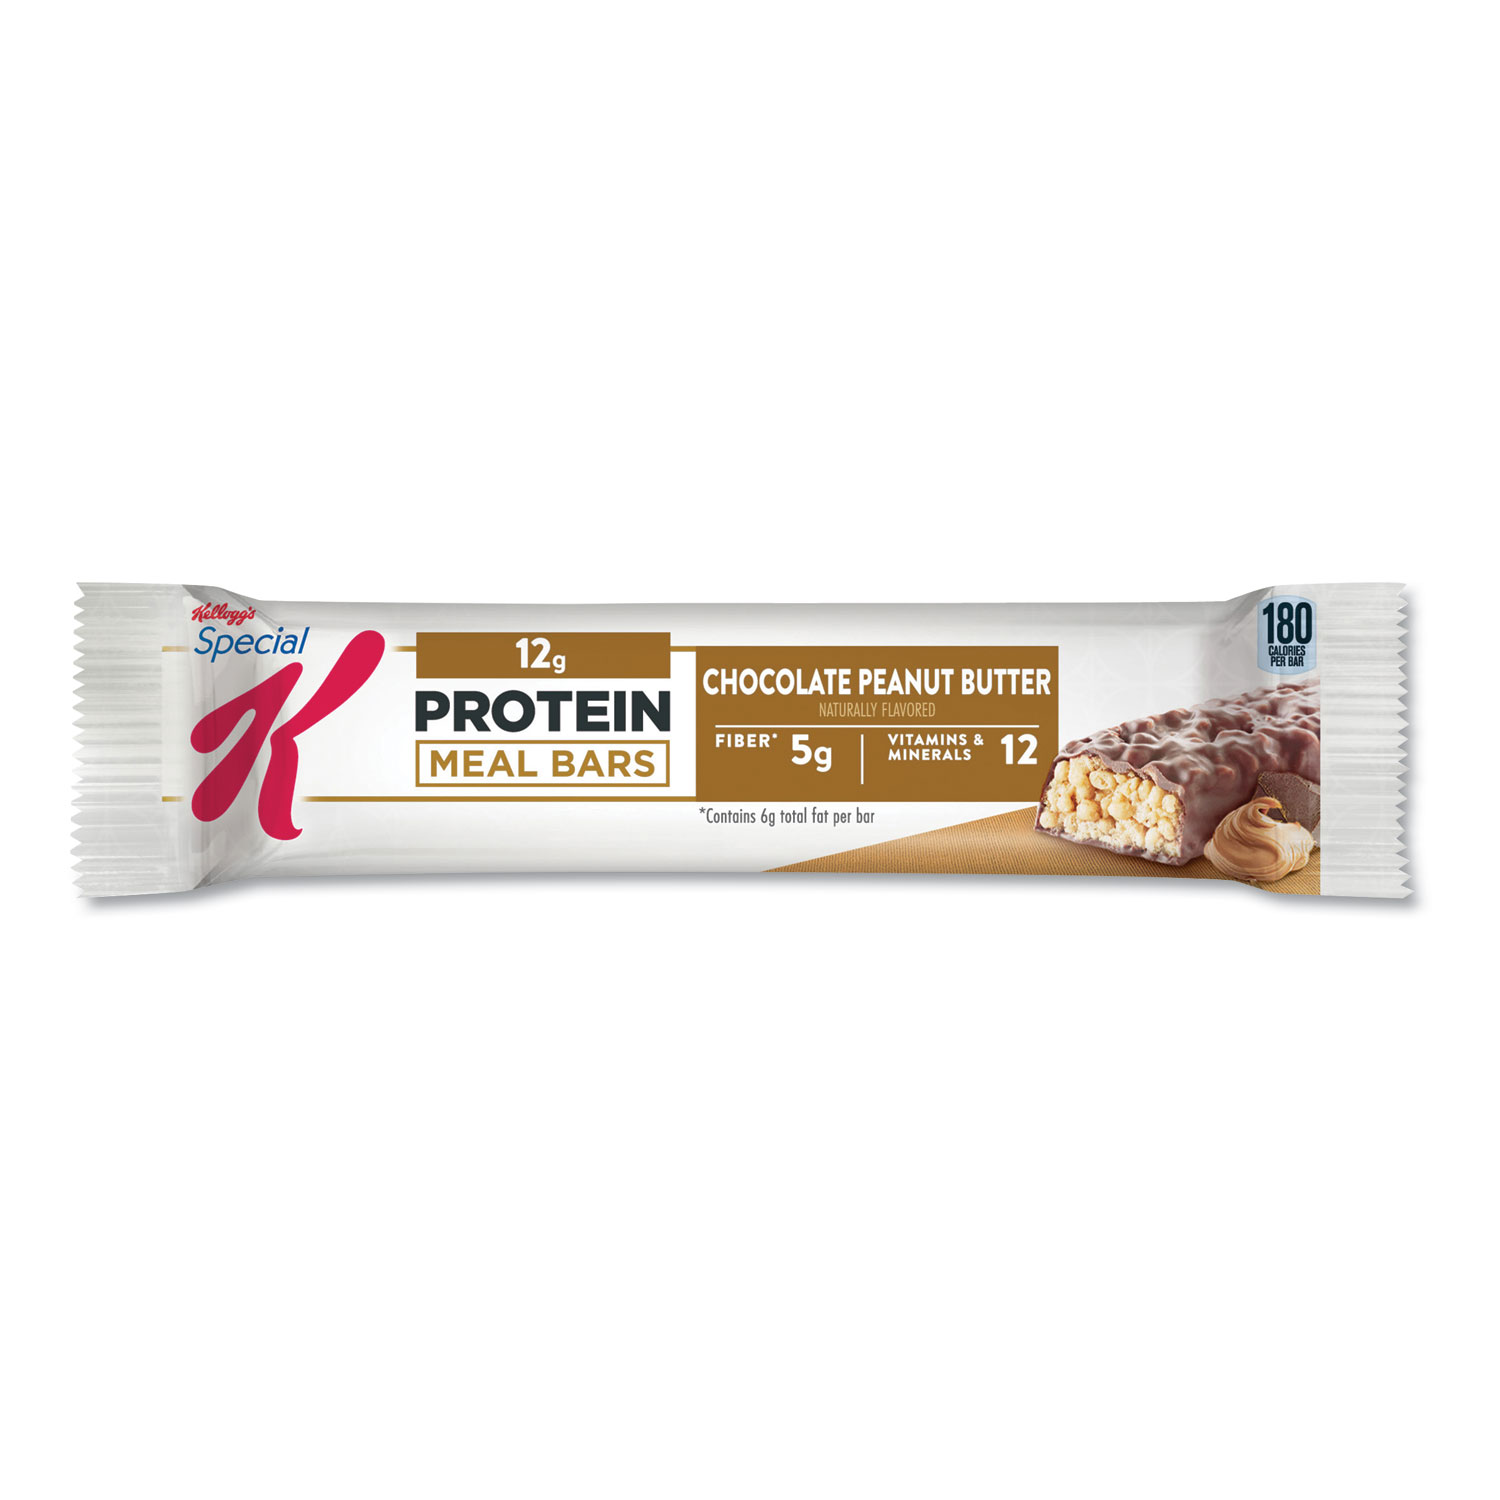  Kellogg's 3800029189 Special K Protein Meal Bar, Chocolate/Peanut Butter, 1.59oz, 8/Box (KEB29190) 